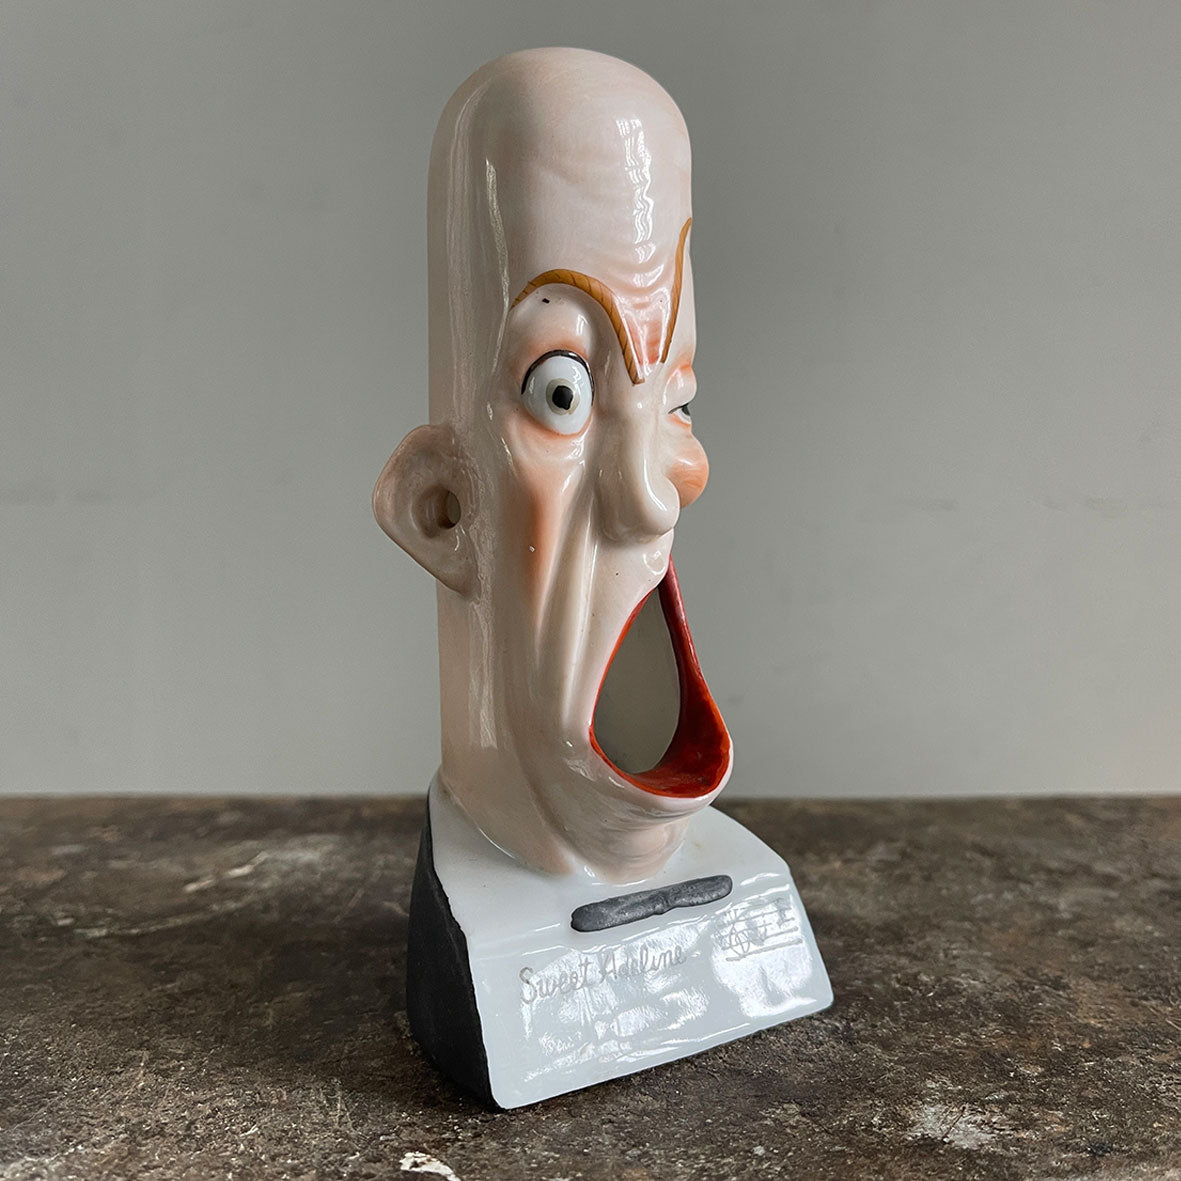 A rare German Porcelain Smoking Ashtray by Schafer &amp; Vater. These unusual objects were used as ashtrays with the smoke of the cigarette escaping through the ear holes. This one sees an old ugly chap with a big old eye and a title that reads 'Sweet Adeline' - SHOP NOW - www.intovintage.co.uk